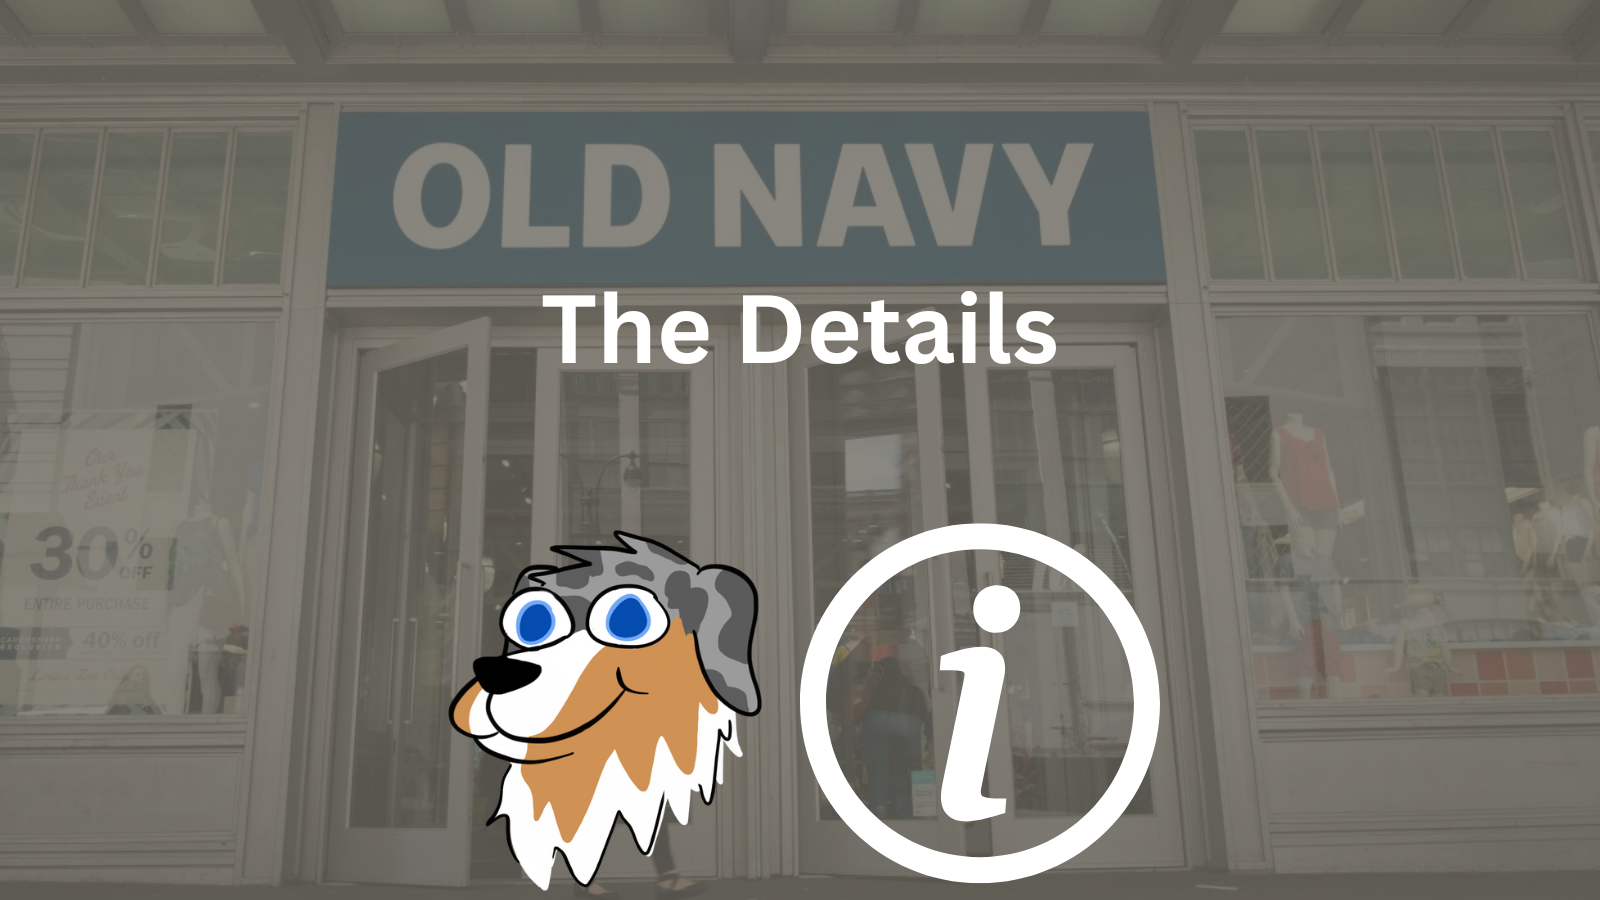 Image Text: "The Details" of Old Navy's pet policy